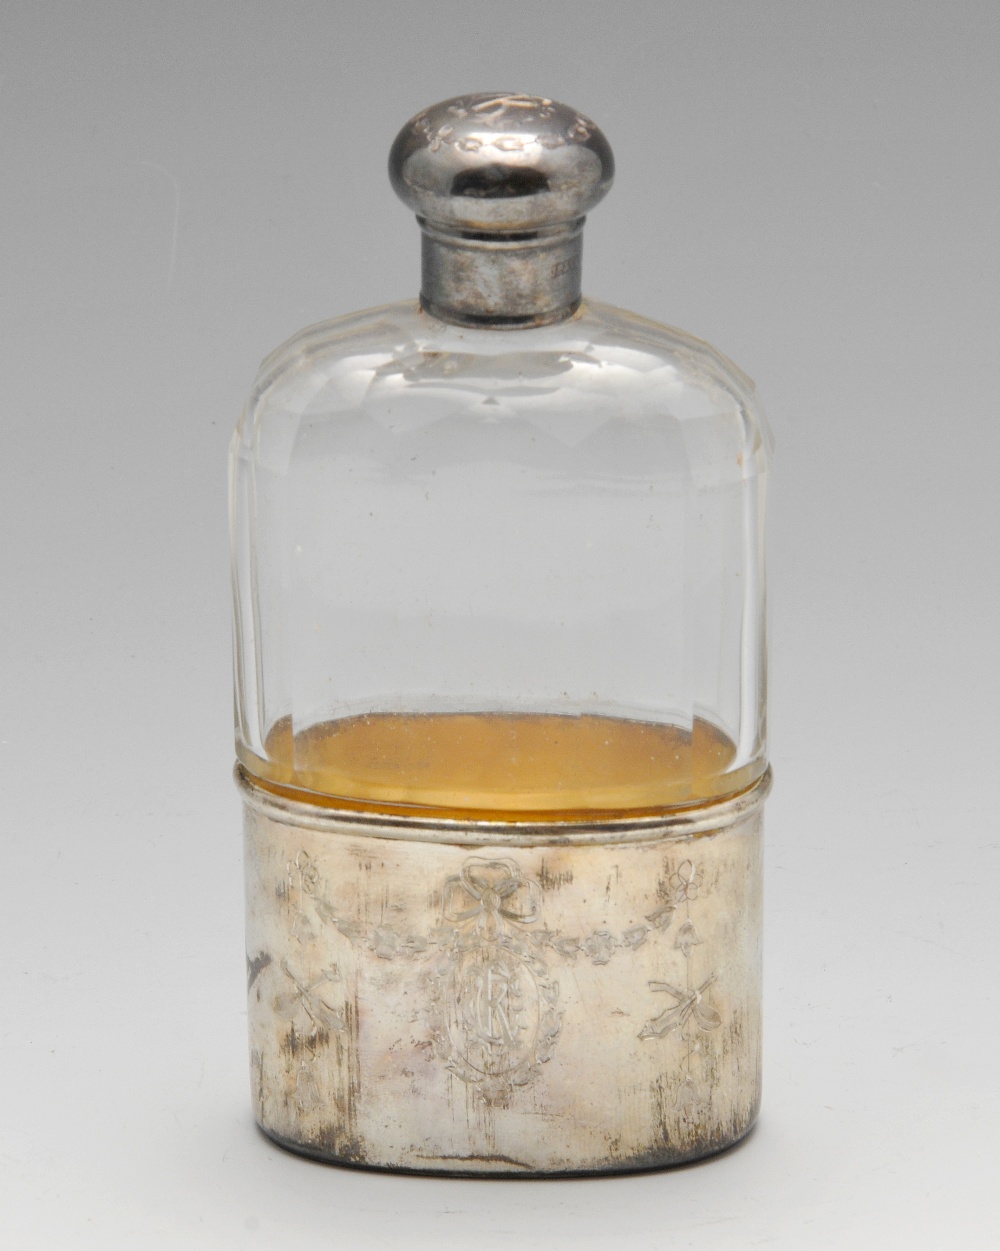 An Edwardian silver mounted hip flask, the clear glass body with faceted shoulders, the detachable